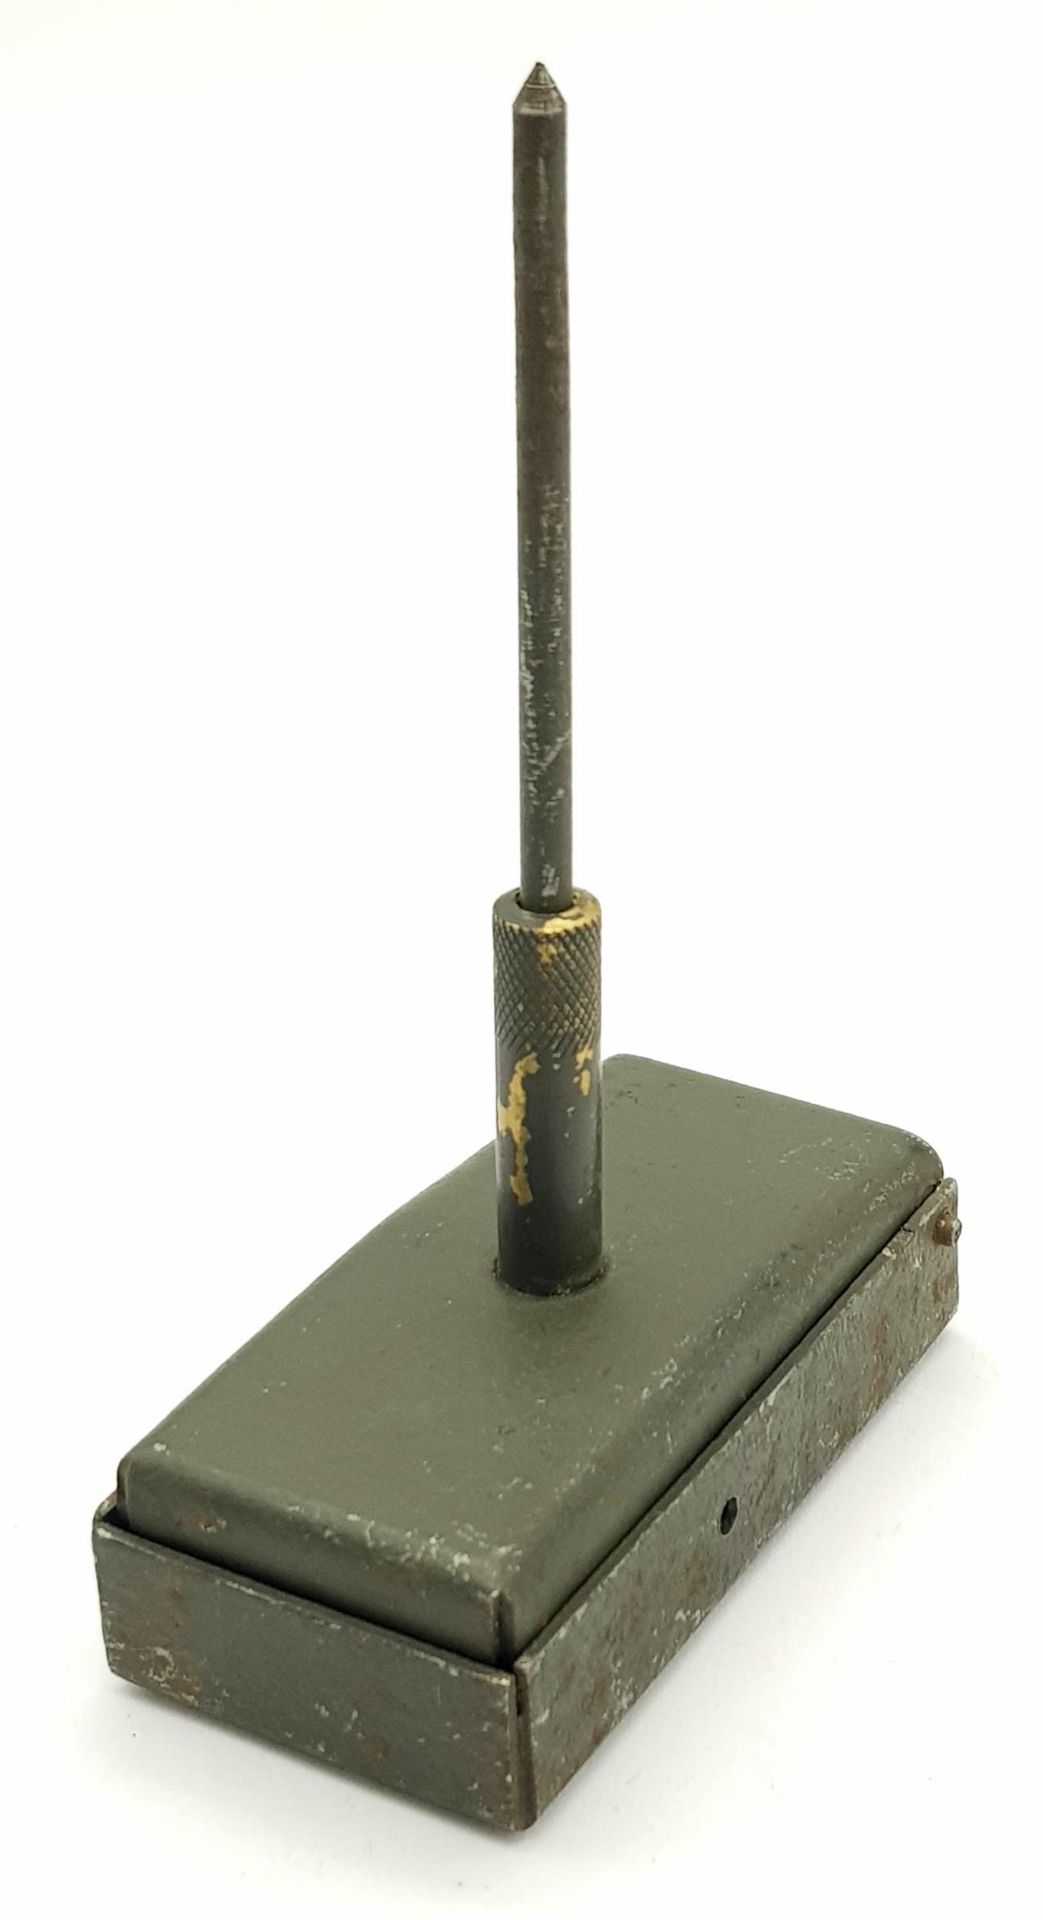 WW2 SOE-OSS No 5 Booby Trap Pressure Switch Mk 1. Still used by some Special Forces today.